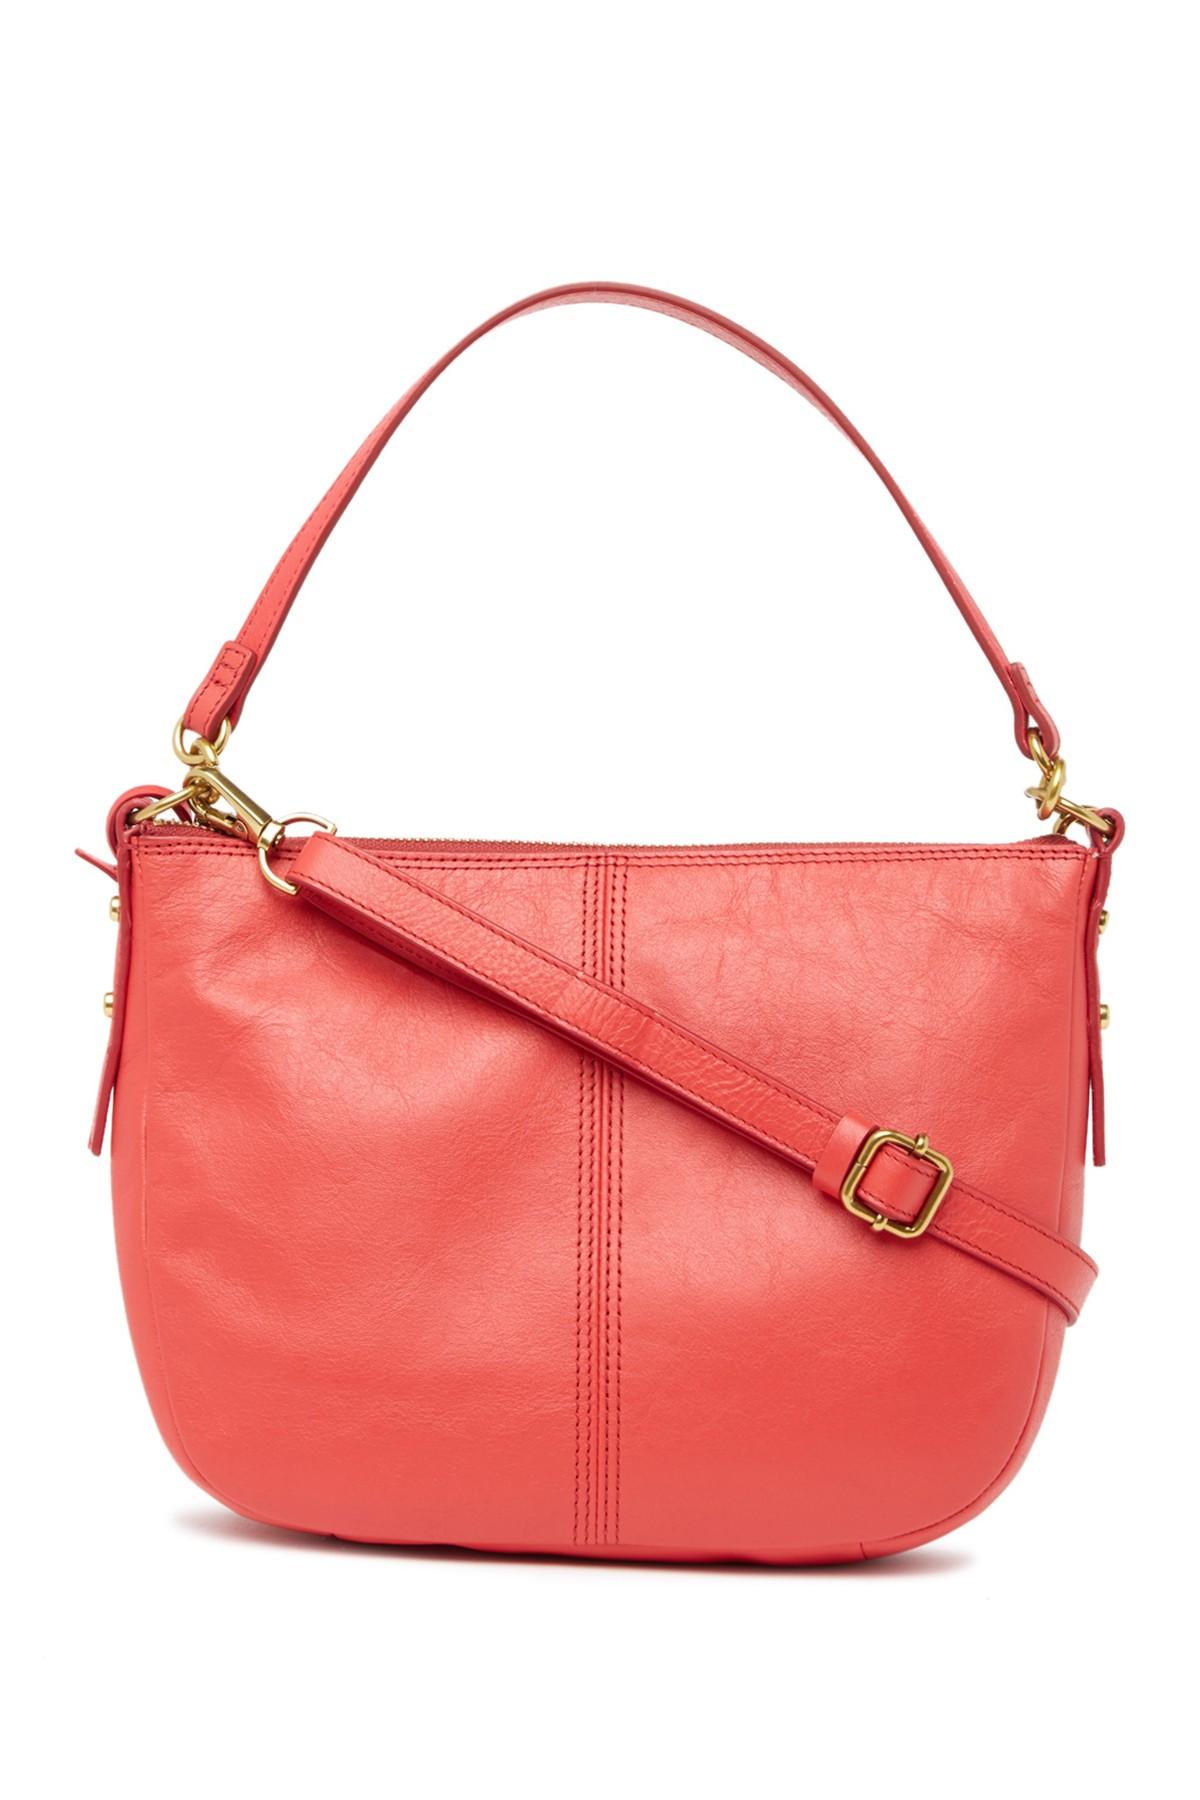 Fossil Jolie Leather Crossbody Bag in Brick Red (Red) - Lyst